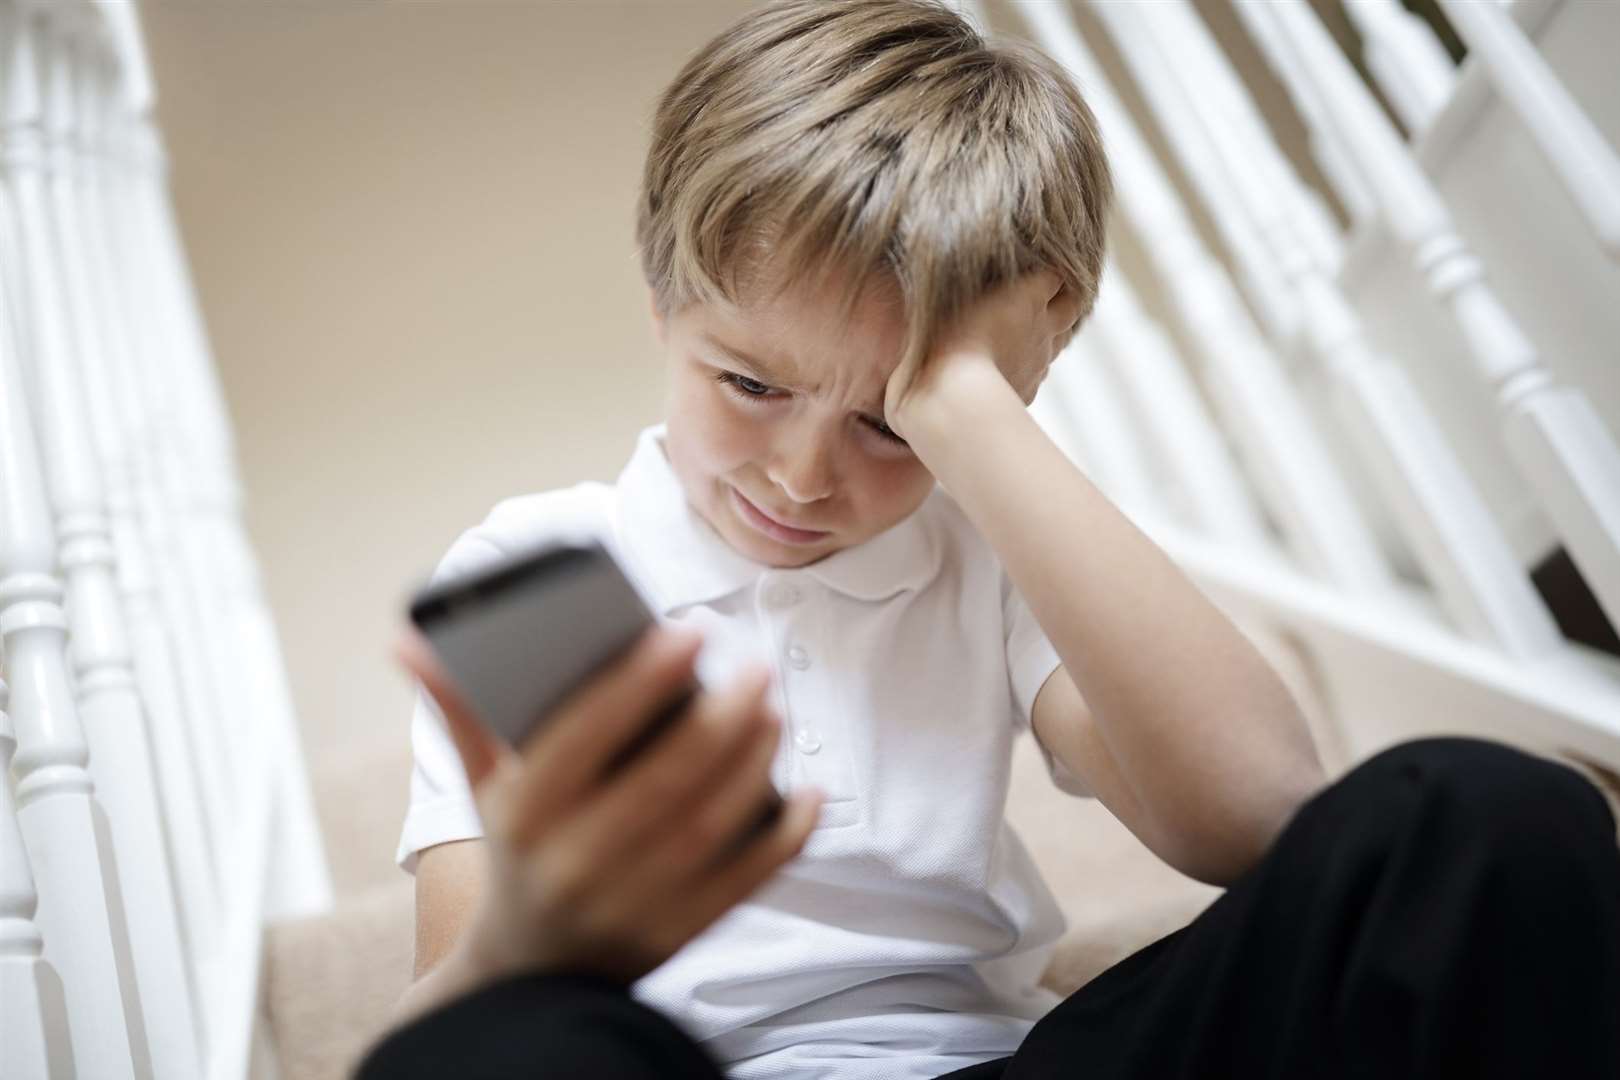 Parents are warned to be sure they know who their child is talking to on their mobile